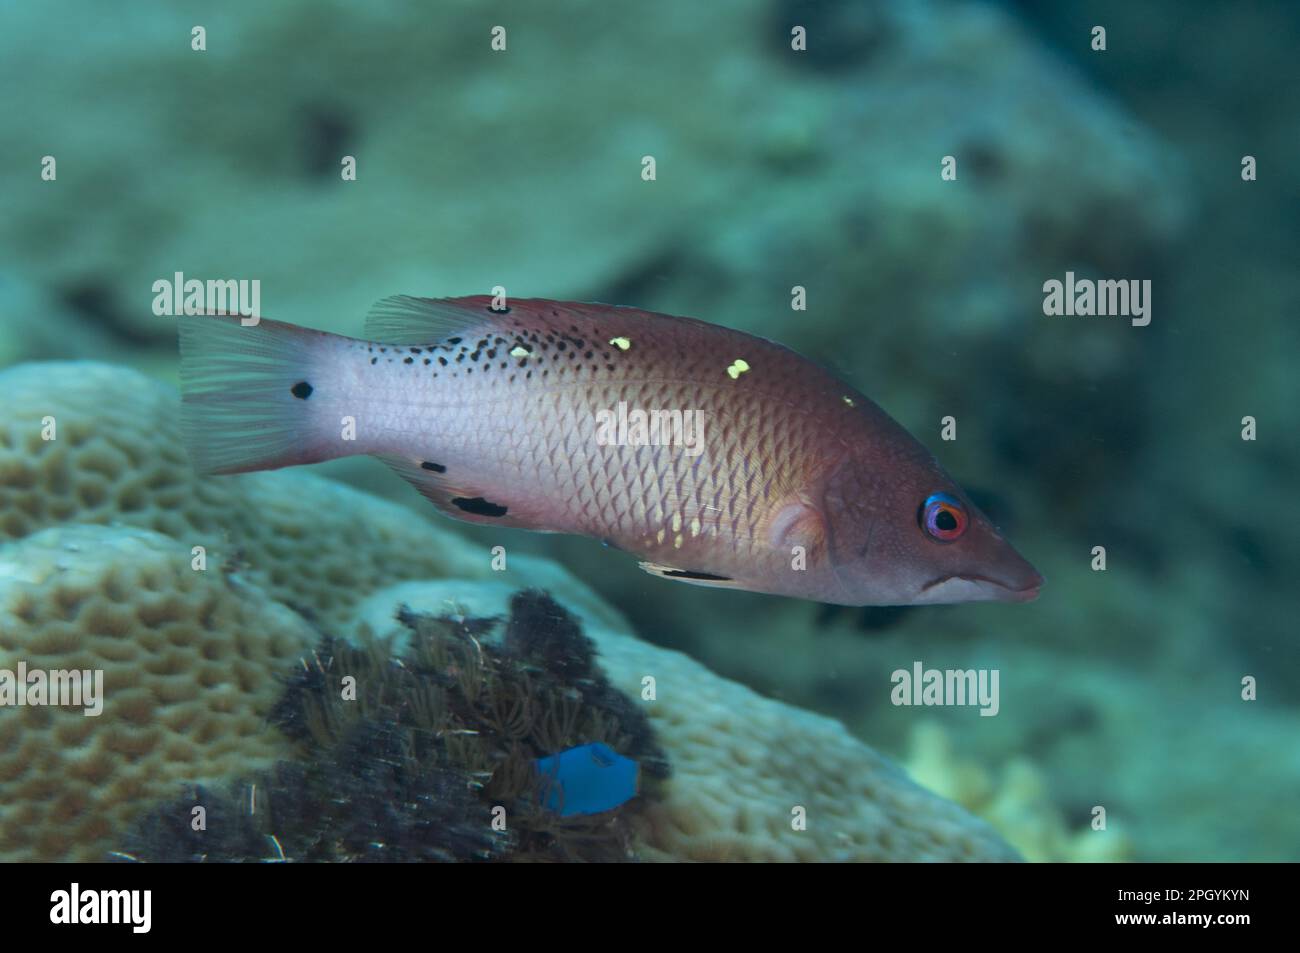 Diana's Wrasse, Diana's Wrasse, Other Animals, Fish, Animals, Wrasse, Diana's Hogfish (Bodianus diana) adult, swimming in reef, Tutuntute, Wetar Stock Photo